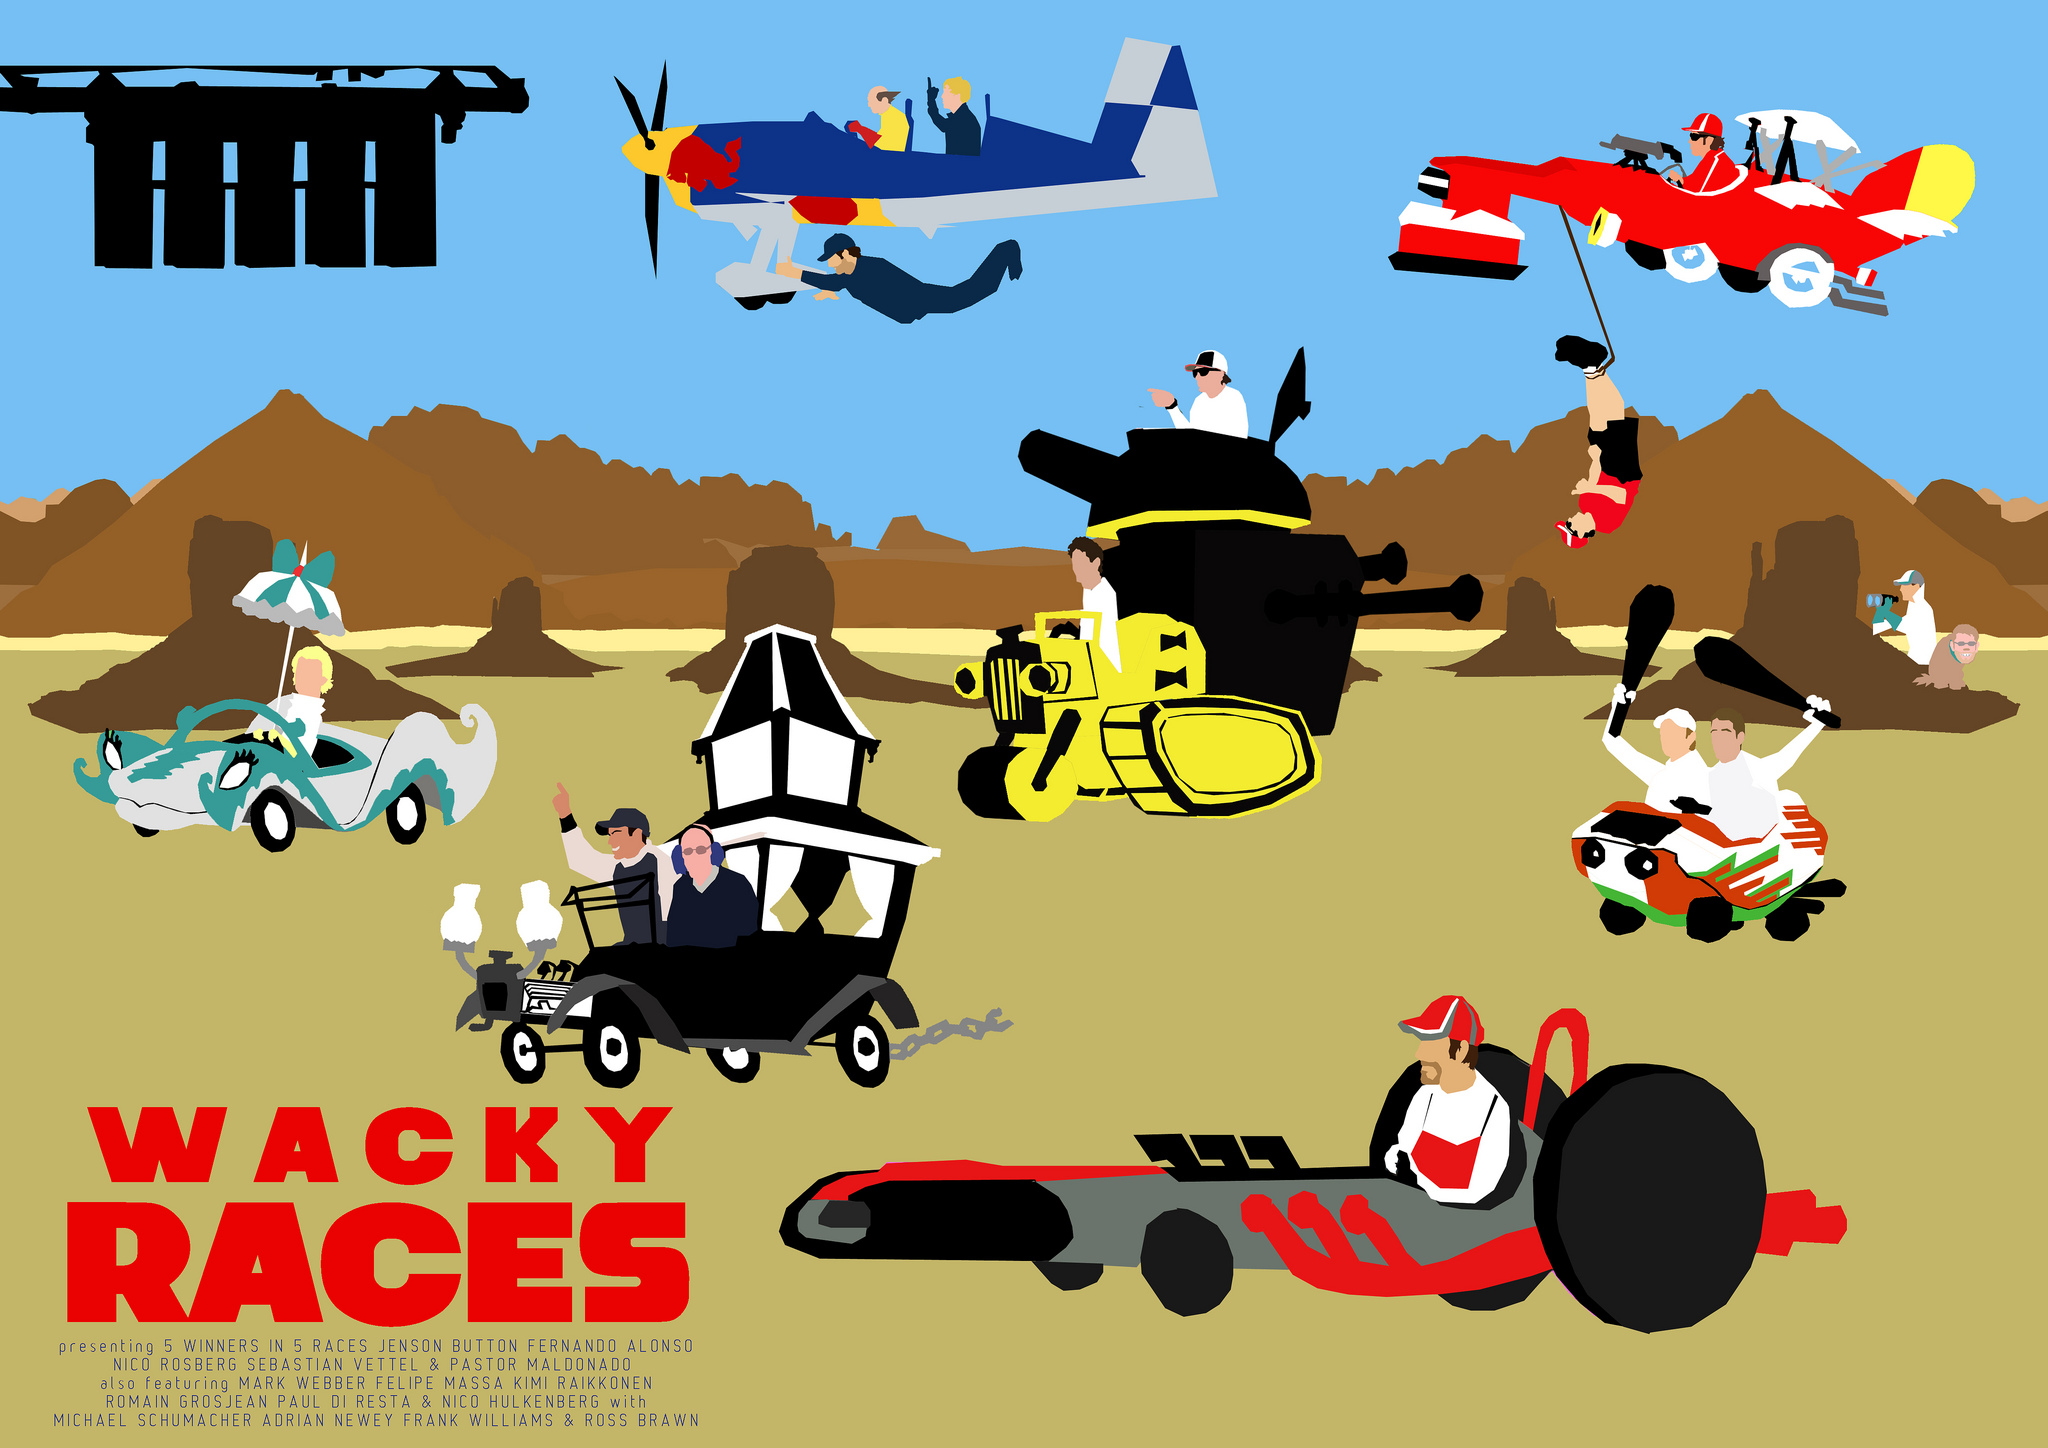 F1_Wacky_Races_Autosport_24May2012_by_Russell_Ford.jpg. 